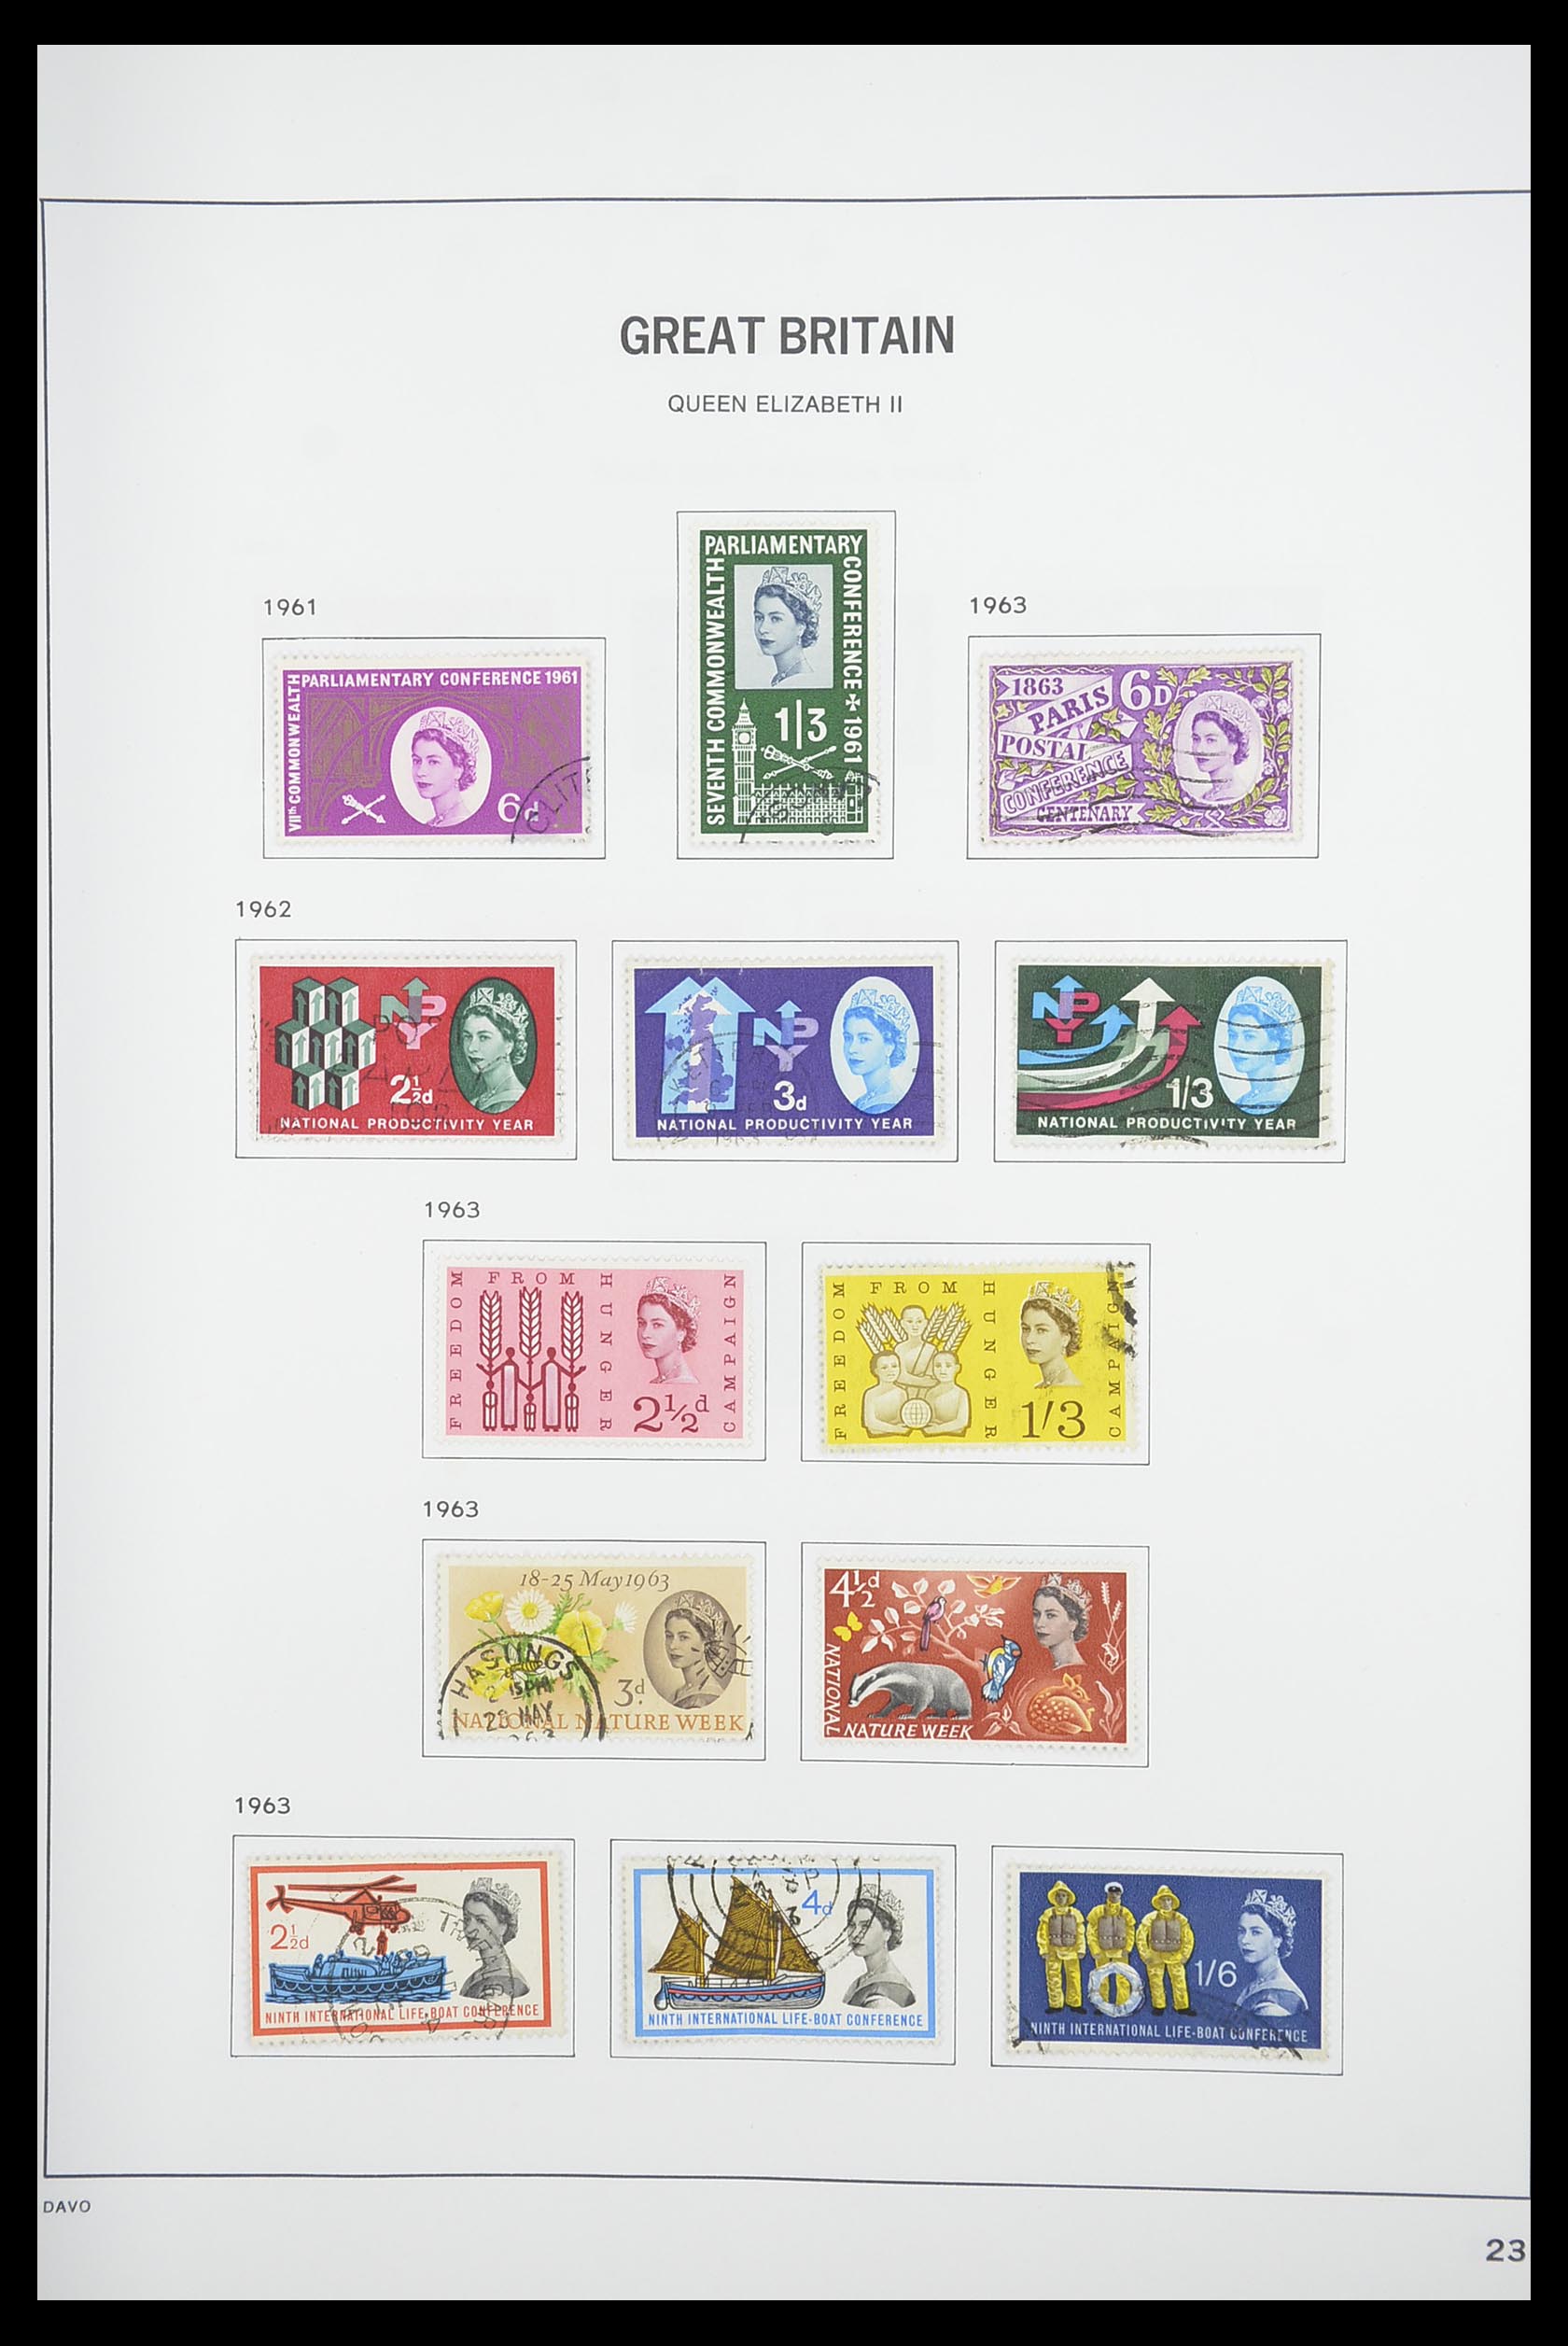 33898 023 - Stamp collection 33898 Great Britain 1840-2006.